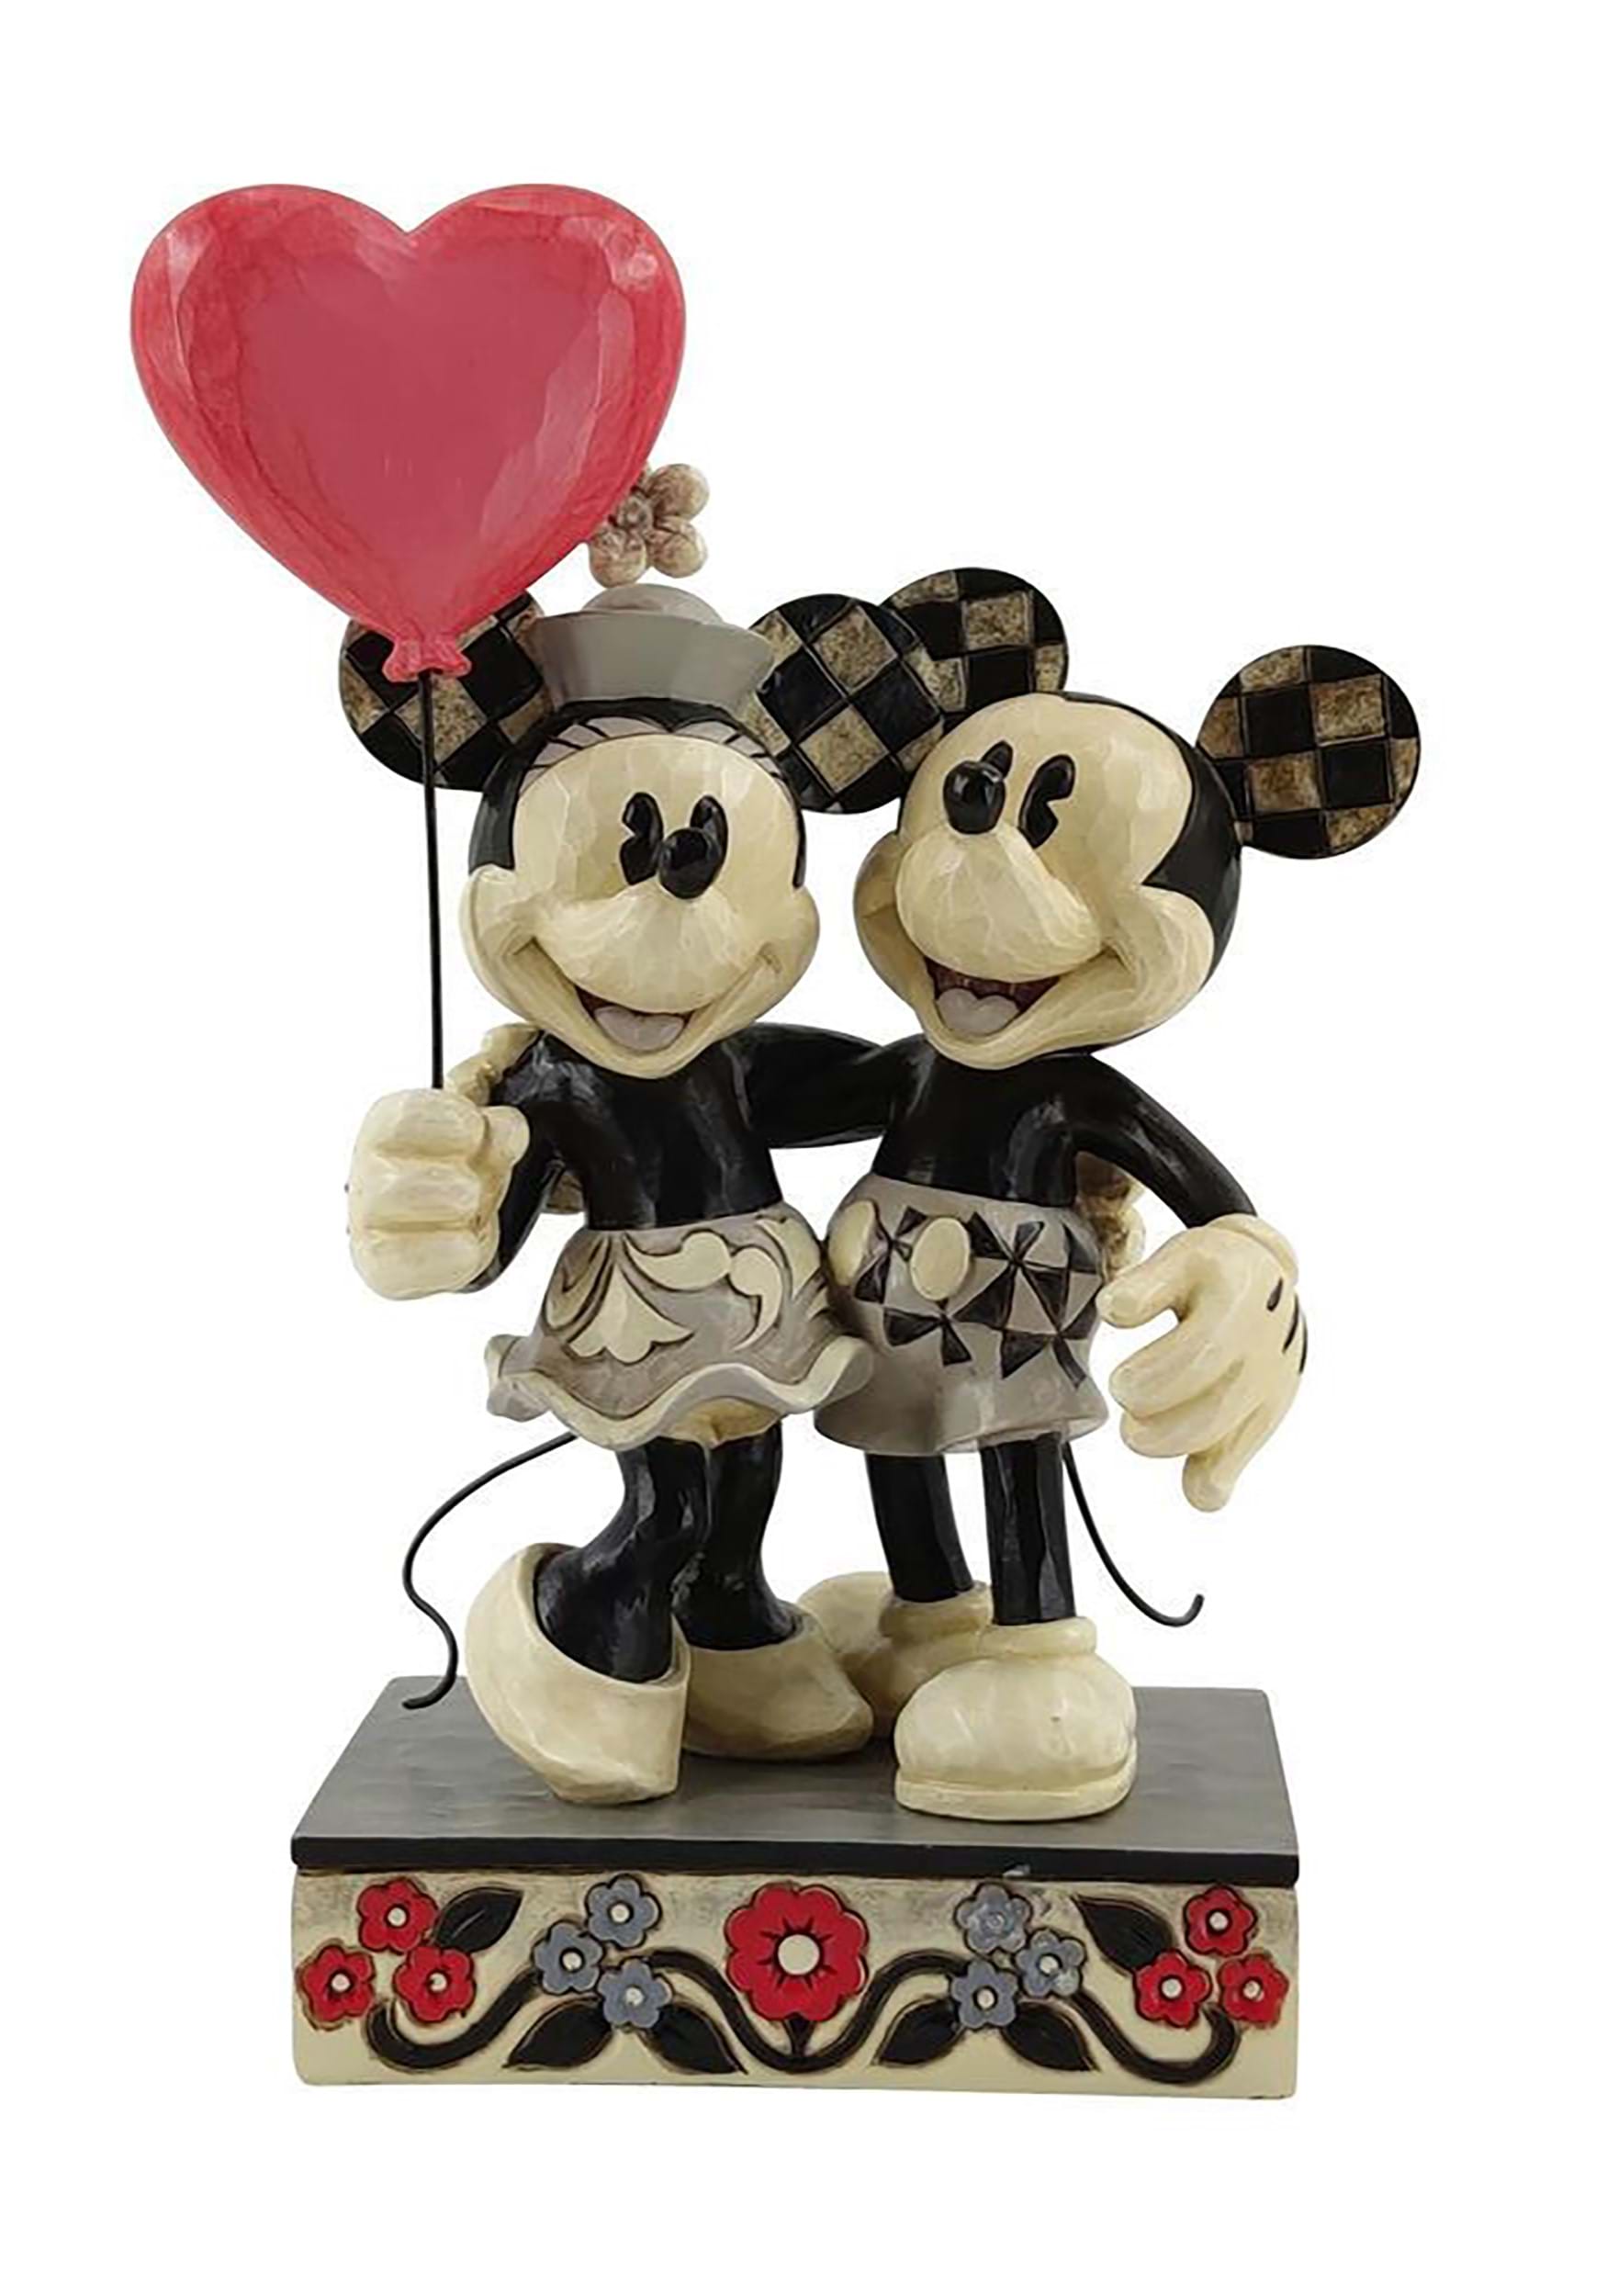 Jim Shore Mickey Mouse and Minnie Mouse Heart Statue